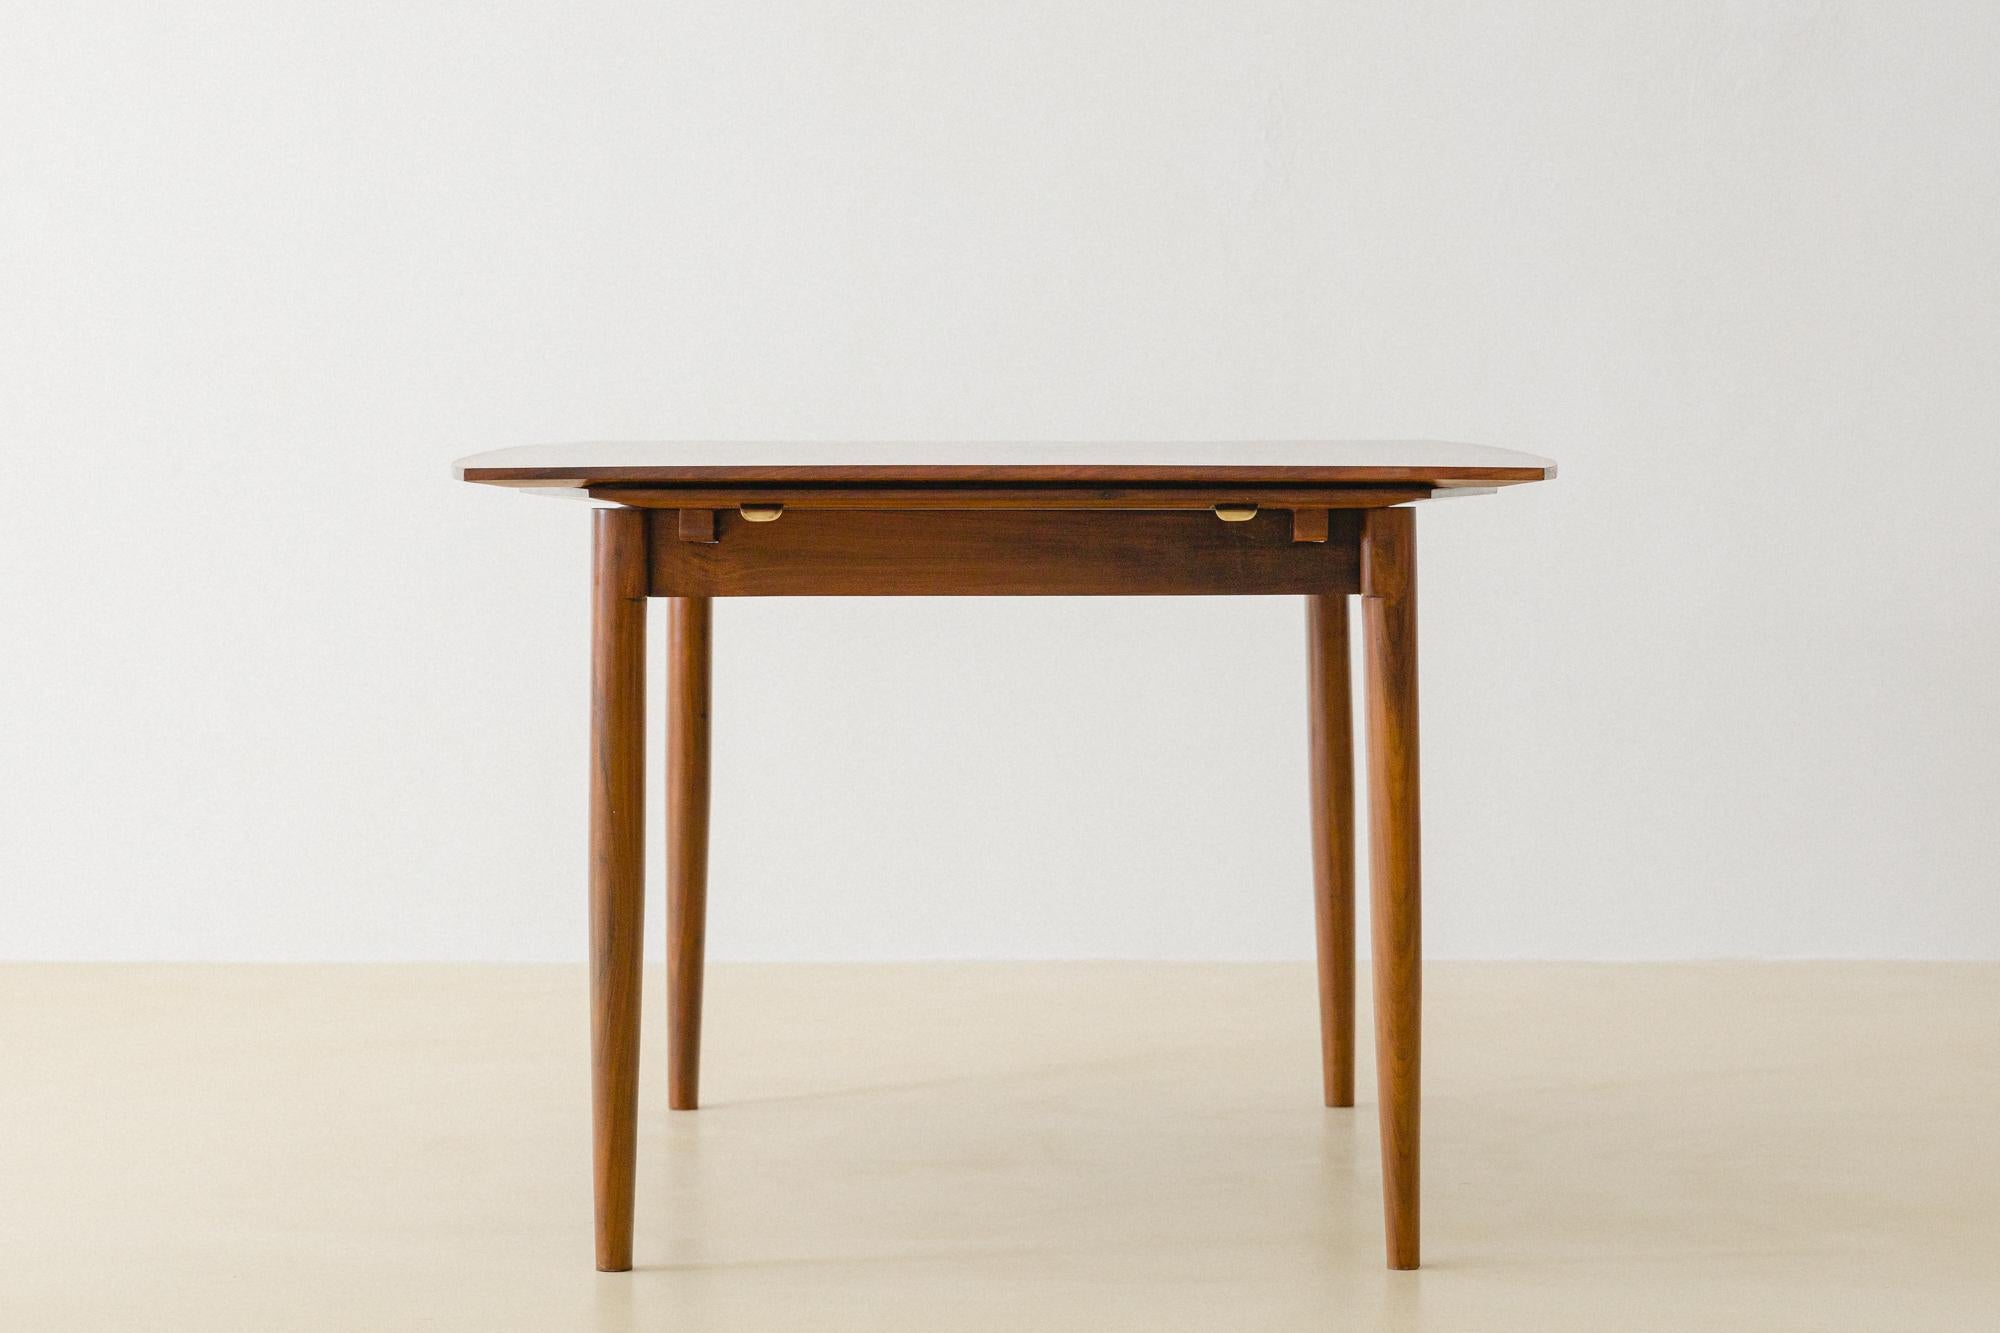 Expandable Dining Table in Caviuna by Carlo Hauner, Brazilian Midcentury, 1950s For Sale 11